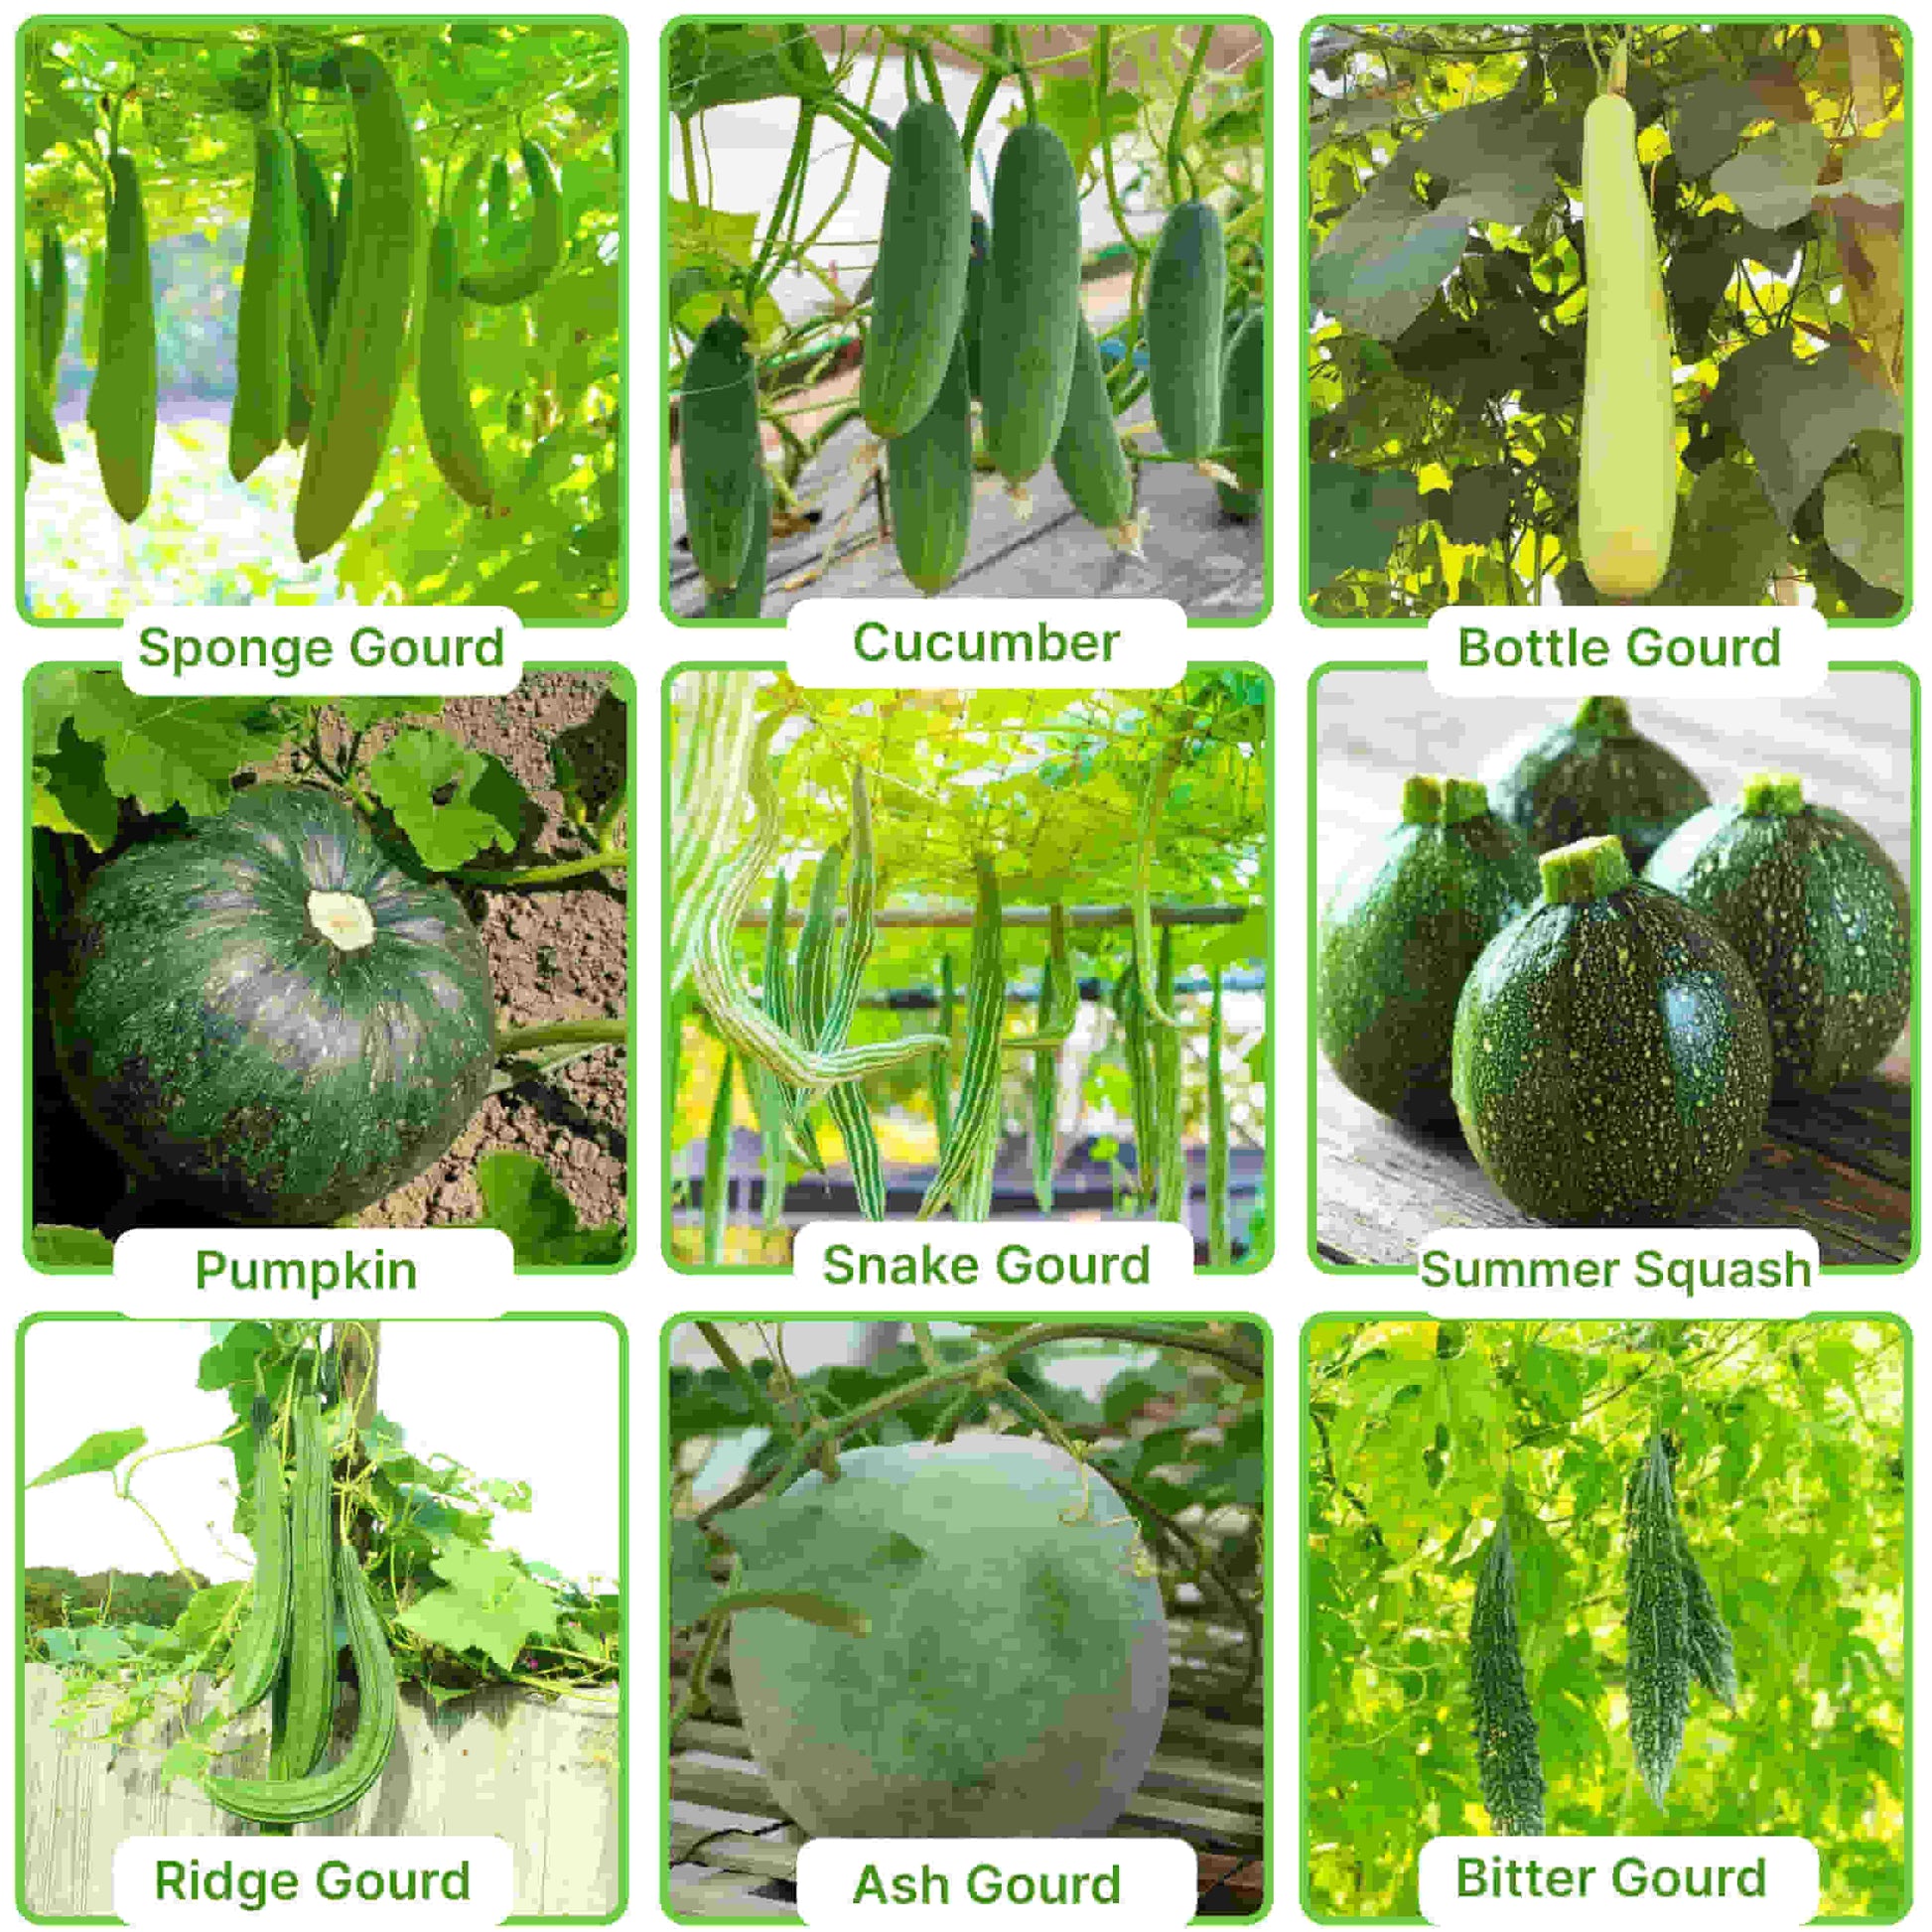 Climbing Vegetable with names